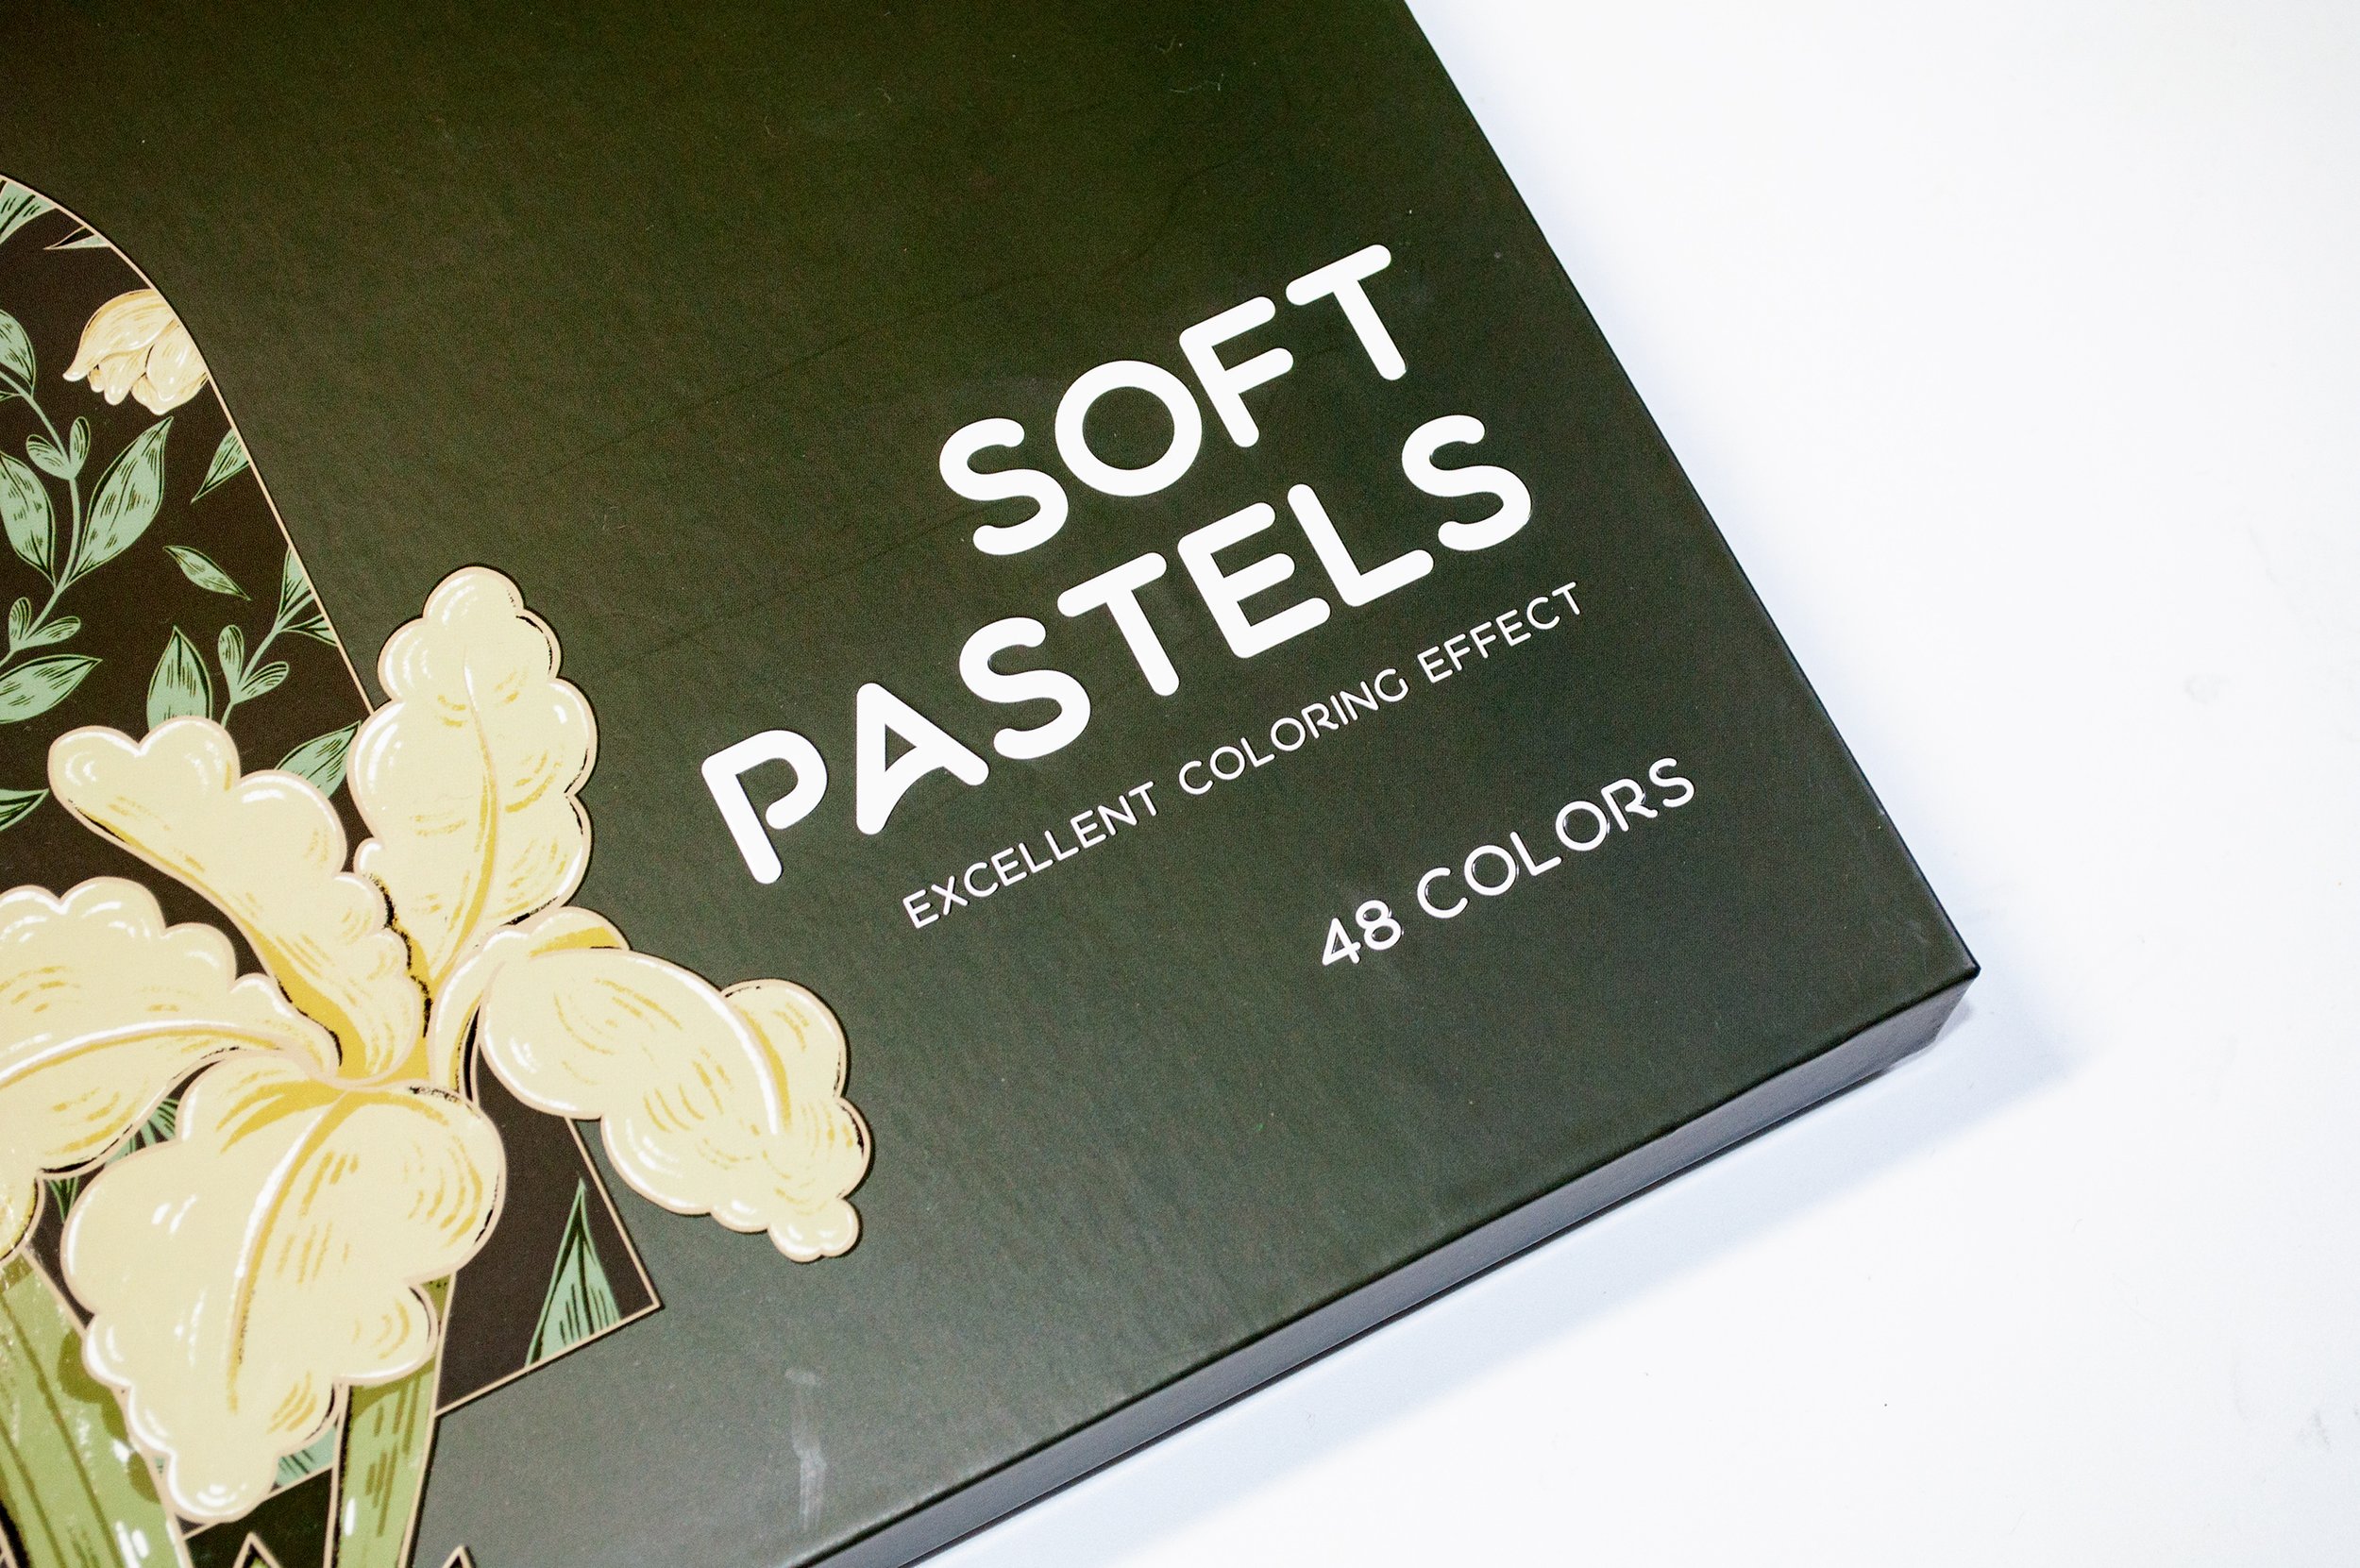 Soft Pastels For Artists And Drawing Paper Equipment Pastel Lot